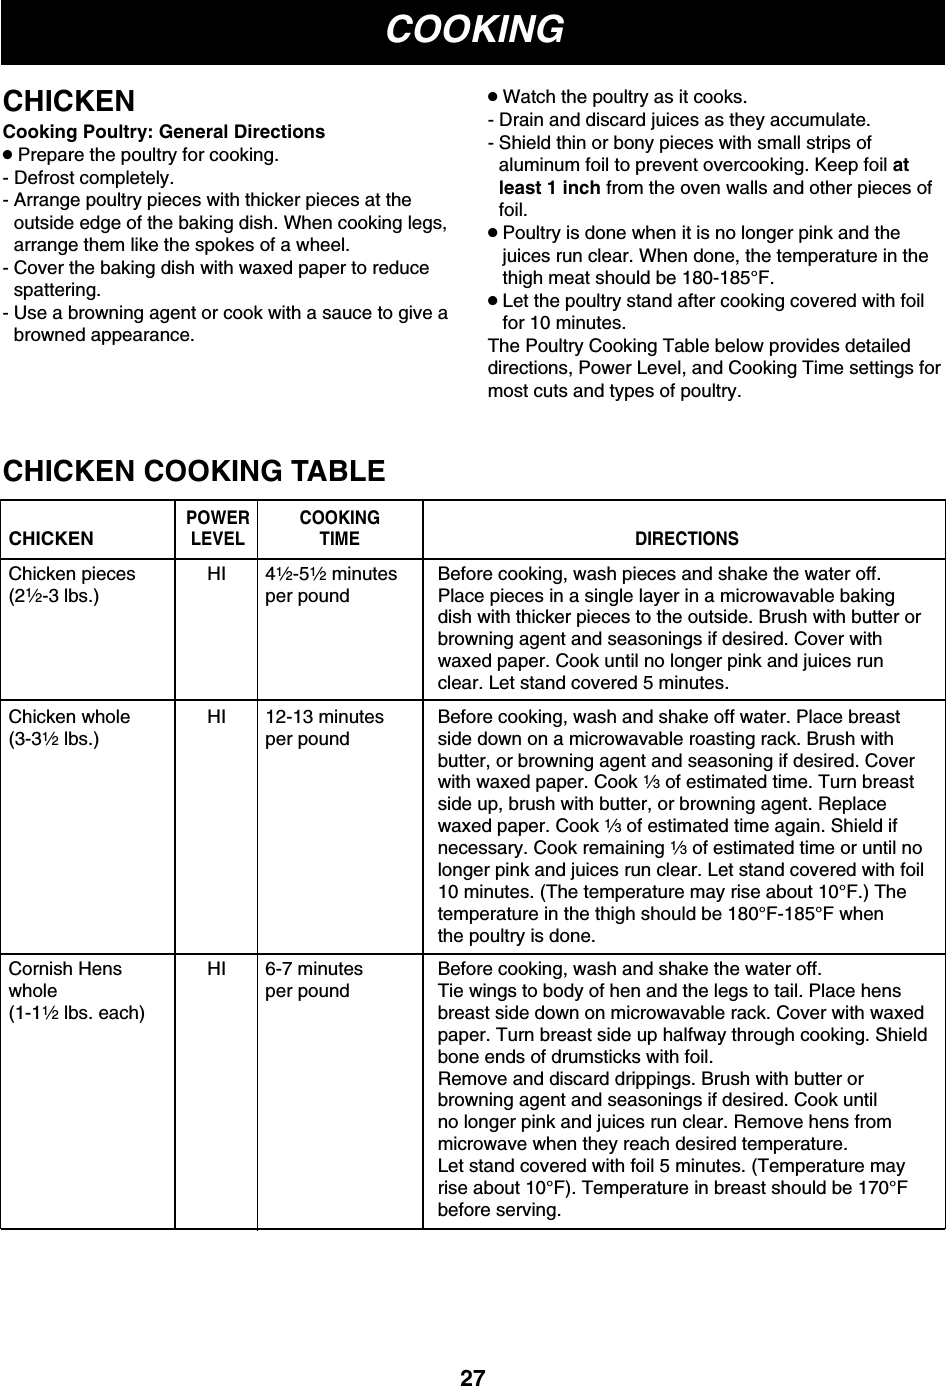 COOKING27CHICKENCooking Poultry: General Directions●Prepare the poultry for cooking.- Defrost completely.- Arrange poultry pieces with thicker pieces at theoutside edge of the baking dish. When cooking legs,arrange them like the spokes of a wheel.- Cover the baking dish with waxed paper to reducespattering.- Use a browning agent or cook with a sauce to give abrowned appearance.●Watch the poultry as it cooks.- Drain and discard juices as they accumulate.- Shield thin or bony pieces with small strips ofaluminum foil to prevent overcooking. Keep foil atleast 1 inch from the oven walls and other pieces offoil.●Poultry is done when it is no longer pink and thejuices run clear. When done, the temperature in thethigh meat should be 180-185°F.●Let the poultry stand after cooking covered with foilfor 10 minutes.The Poultry Cooking Table below provides detaileddirections, Power Level, and Cooking Time settings formost cuts and types of poultry.CHICKEN COOKING TABLECHICKENChicken pieces(21⁄2-3 lbs.)Chicken whole(3-31⁄2lbs.)Cornish Henswhole(1-11⁄2lbs. each)HIHIHI41⁄2-51⁄2minutesper pound12-13 minutesper pound6-7 minutesper poundBefore cooking, wash pieces and shake the water off.Place pieces in a single layer in a microwavable bakingdish with thicker pieces to the outside. Brush with butter orbrowning agent and seasonings if desired. Cover withwaxed paper. Cook until no longer pink and juices runclear. Let stand covered 5 minutes.Before cooking, wash and shake off water. Place breastside down on a microwavable roasting rack. Brush withbutter, or browning agent and seasoning if desired. Coverwith waxed paper. Cook 1⁄3of estimated time. Turn breastside up, brush with butter, or browning agent. Replacewaxed paper. Cook 1⁄3of estimated time again. Shield ifnecessary. Cook remaining 1⁄3of estimated time or until nolonger pink and juices run clear. Let stand covered with foil10 minutes. (The temperature may rise about 10°F.) Thetemperature in the thigh should be 180°F-185°F whenthe poultry is done.Before cooking, wash and shake the water off.Tie wings to body of hen and the legs to tail. Place hensbreast side down on microwavable rack. Cover with waxedpaper. Turn breast side up halfway through cooking. Shieldbone ends of drumsticks with foil.Remove and discard drippings. Brush with butter orbrowning agent and seasonings if desired. Cook untilno longer pink and juices run clear. Remove hens frommicrowave when they reach desired temperature.Let stand covered with foil 5 minutes. (Temperature mayrise about 10°F). Temperature in breast should be 170°Fbefore serving.POWERLEVELCOOKINGTIME DIRECTIONS